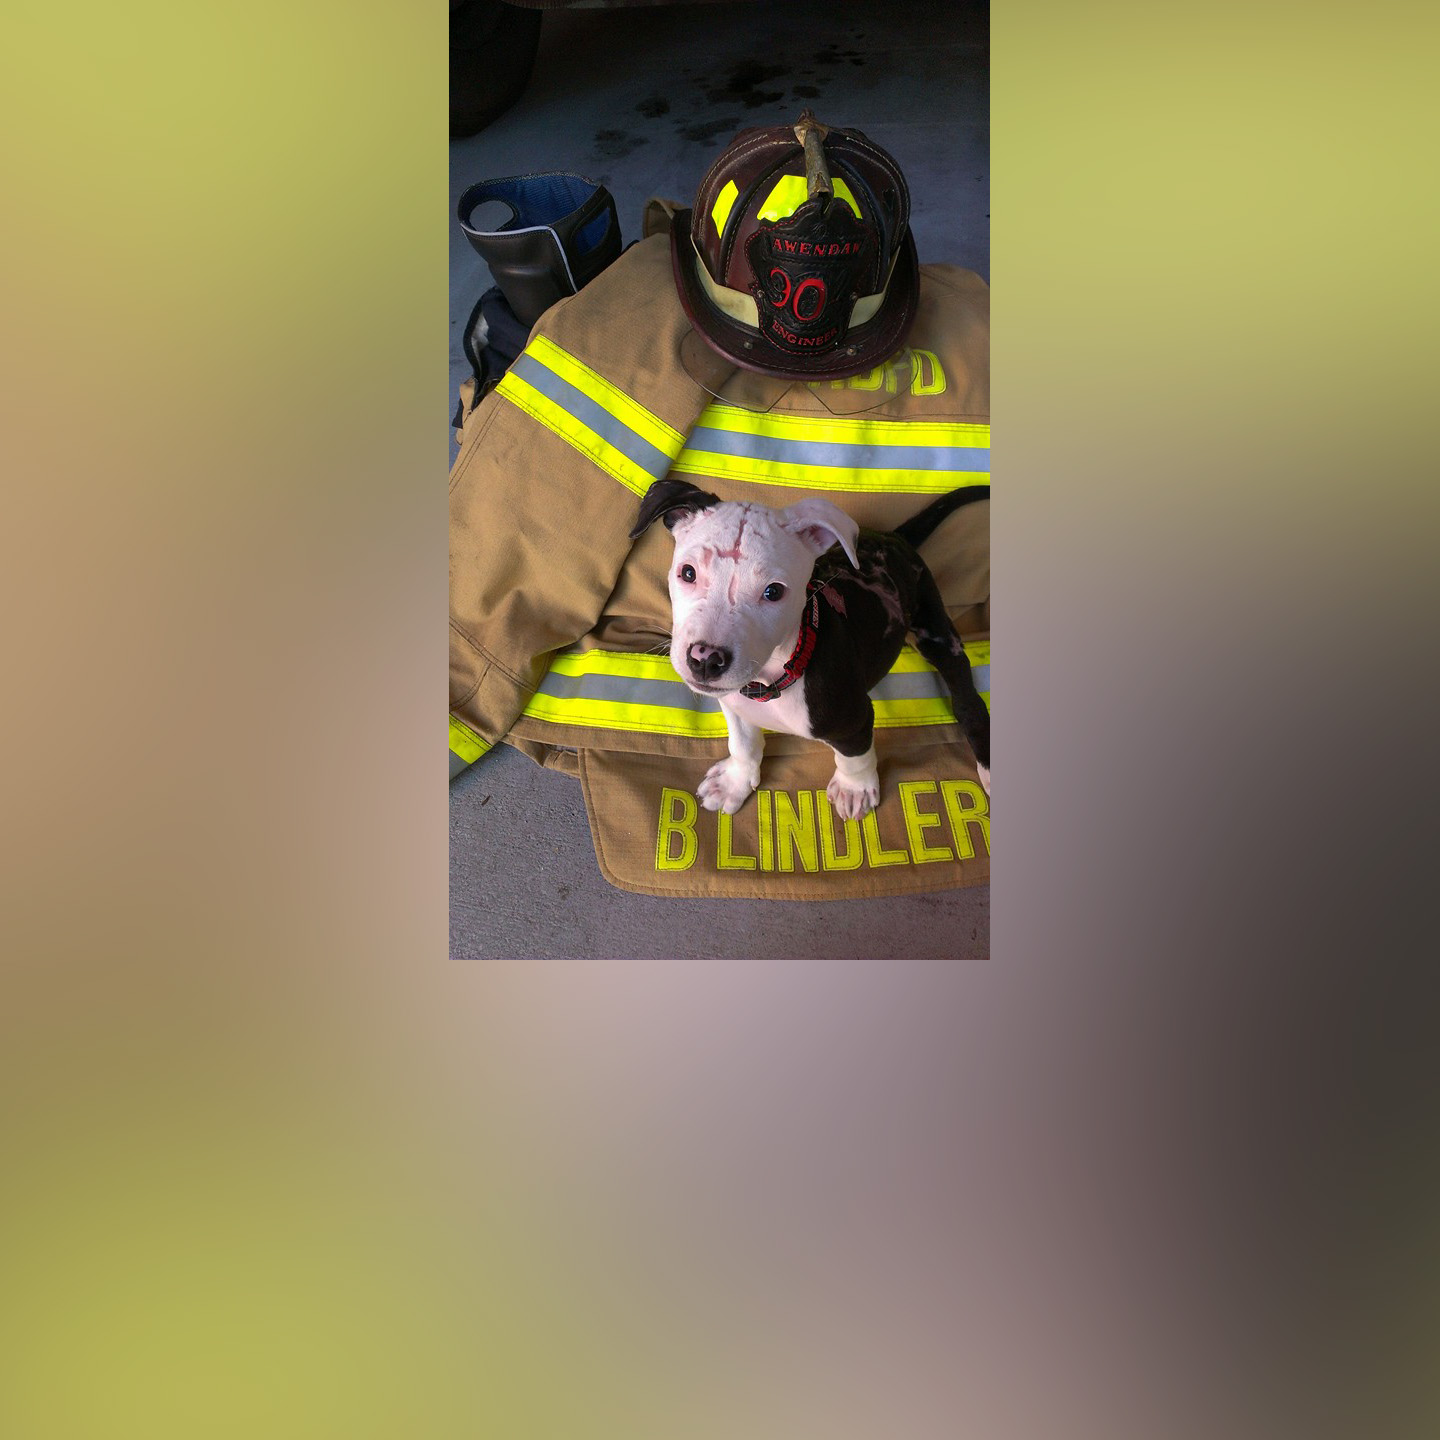 PHOTO: A Pit Bull named Jake, who was badly burned in a house fire as a puppy in April 2015, is now a "firefighter" and mascot at Hanahan Fire Department in South Carolina, according to William Lindler, his owner and the firefighter who saved him. 